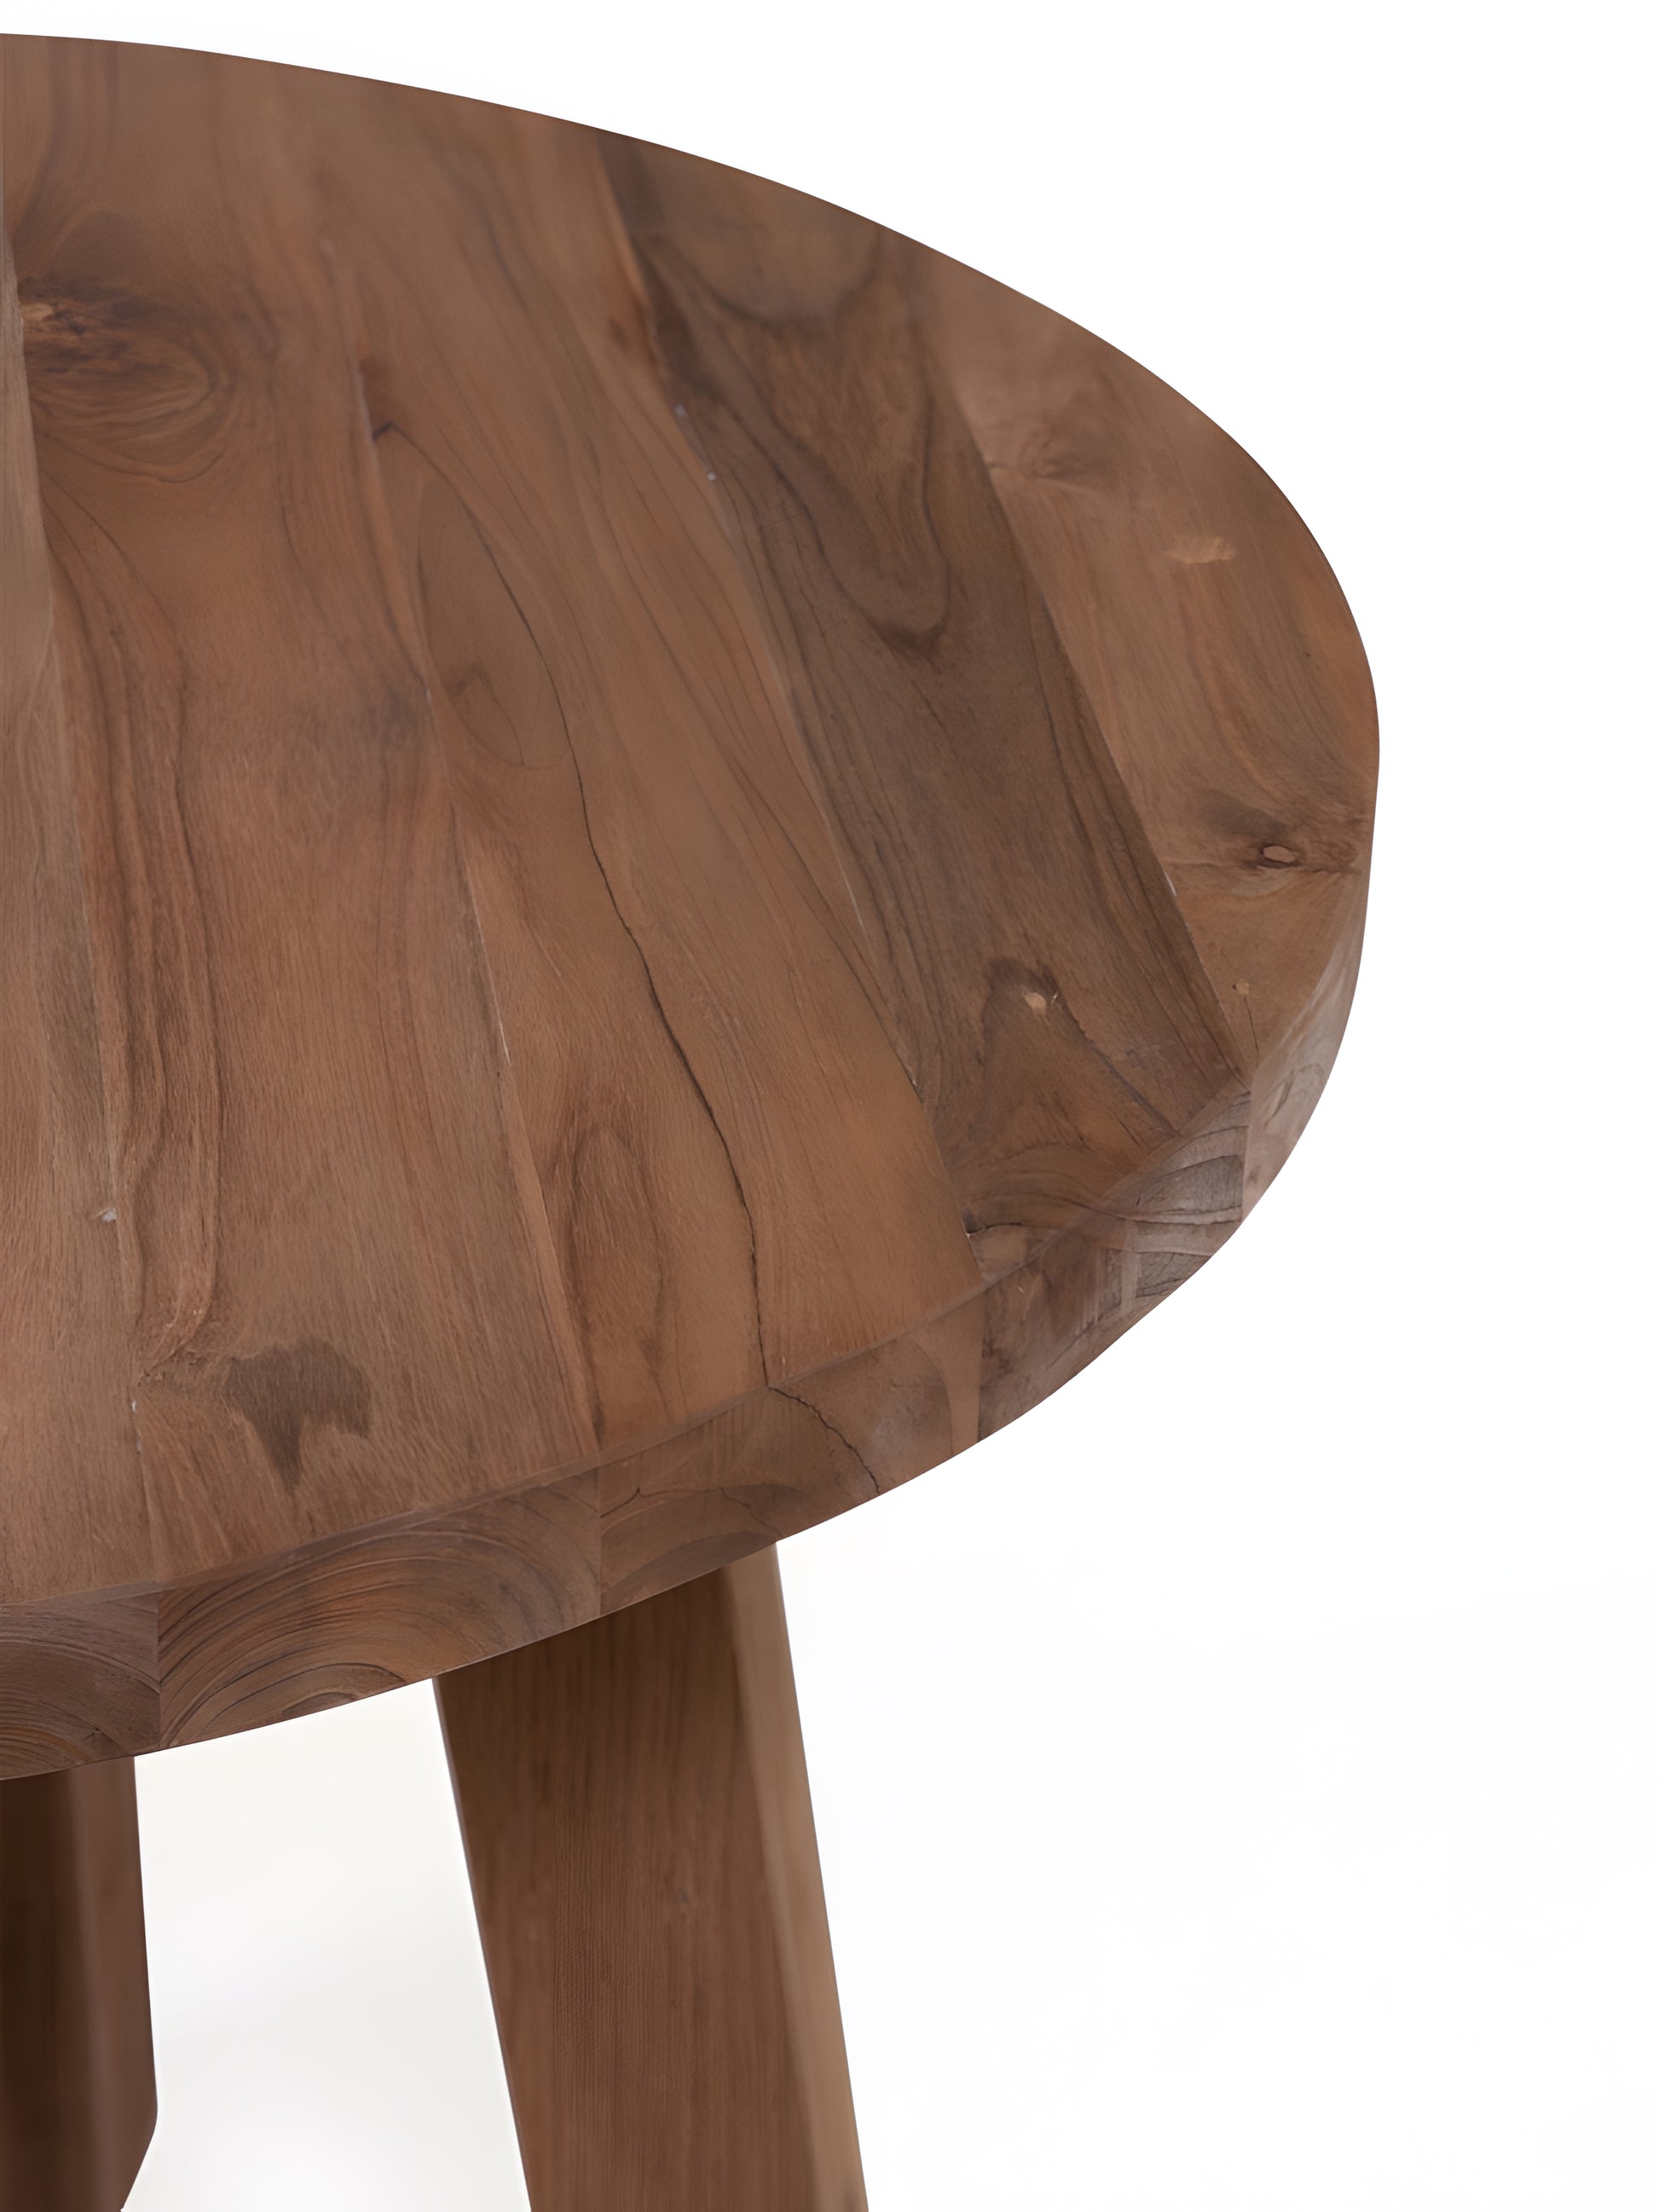 Pescara Reclaimed Teakwood Round Coffee Table detail view by Mellowdays Furniture